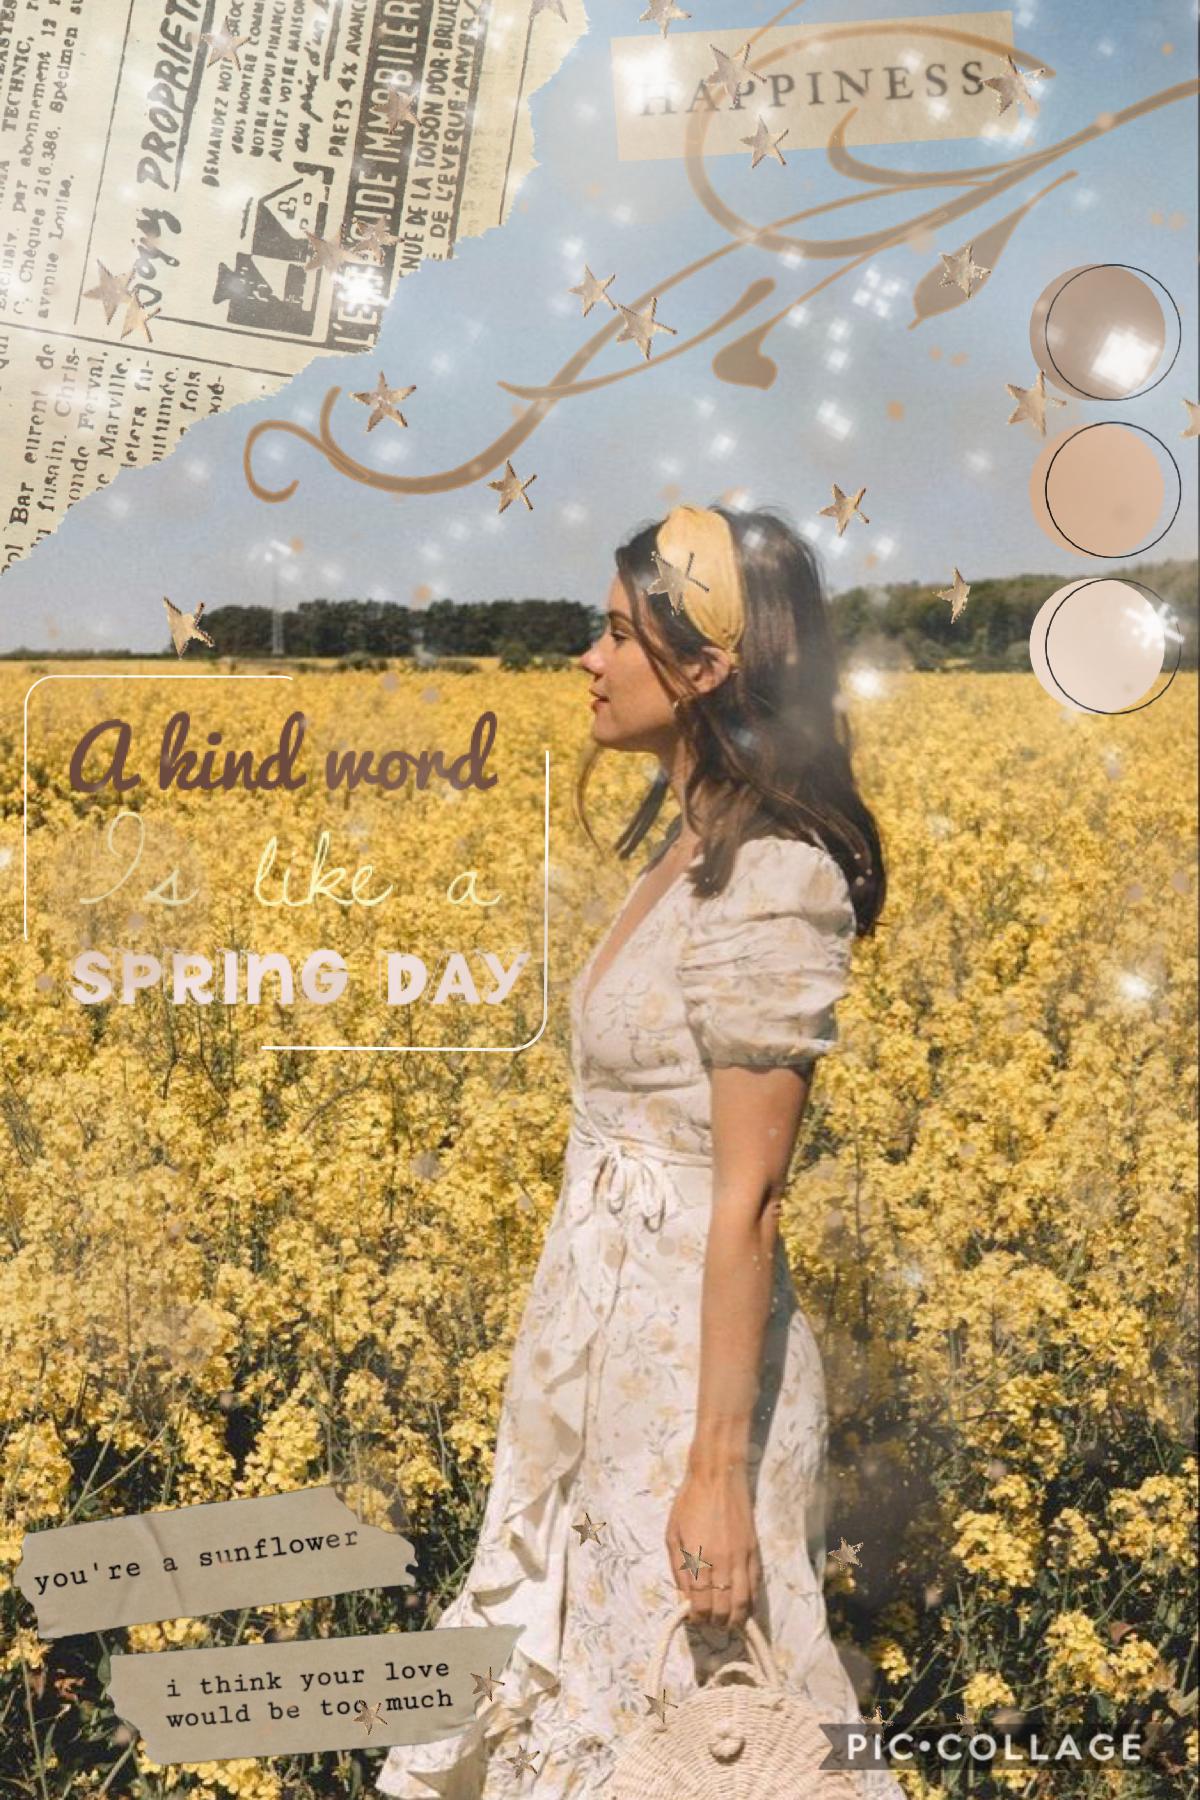 ~Tap~
A kind word is like a spring day. Hope you like this collage 